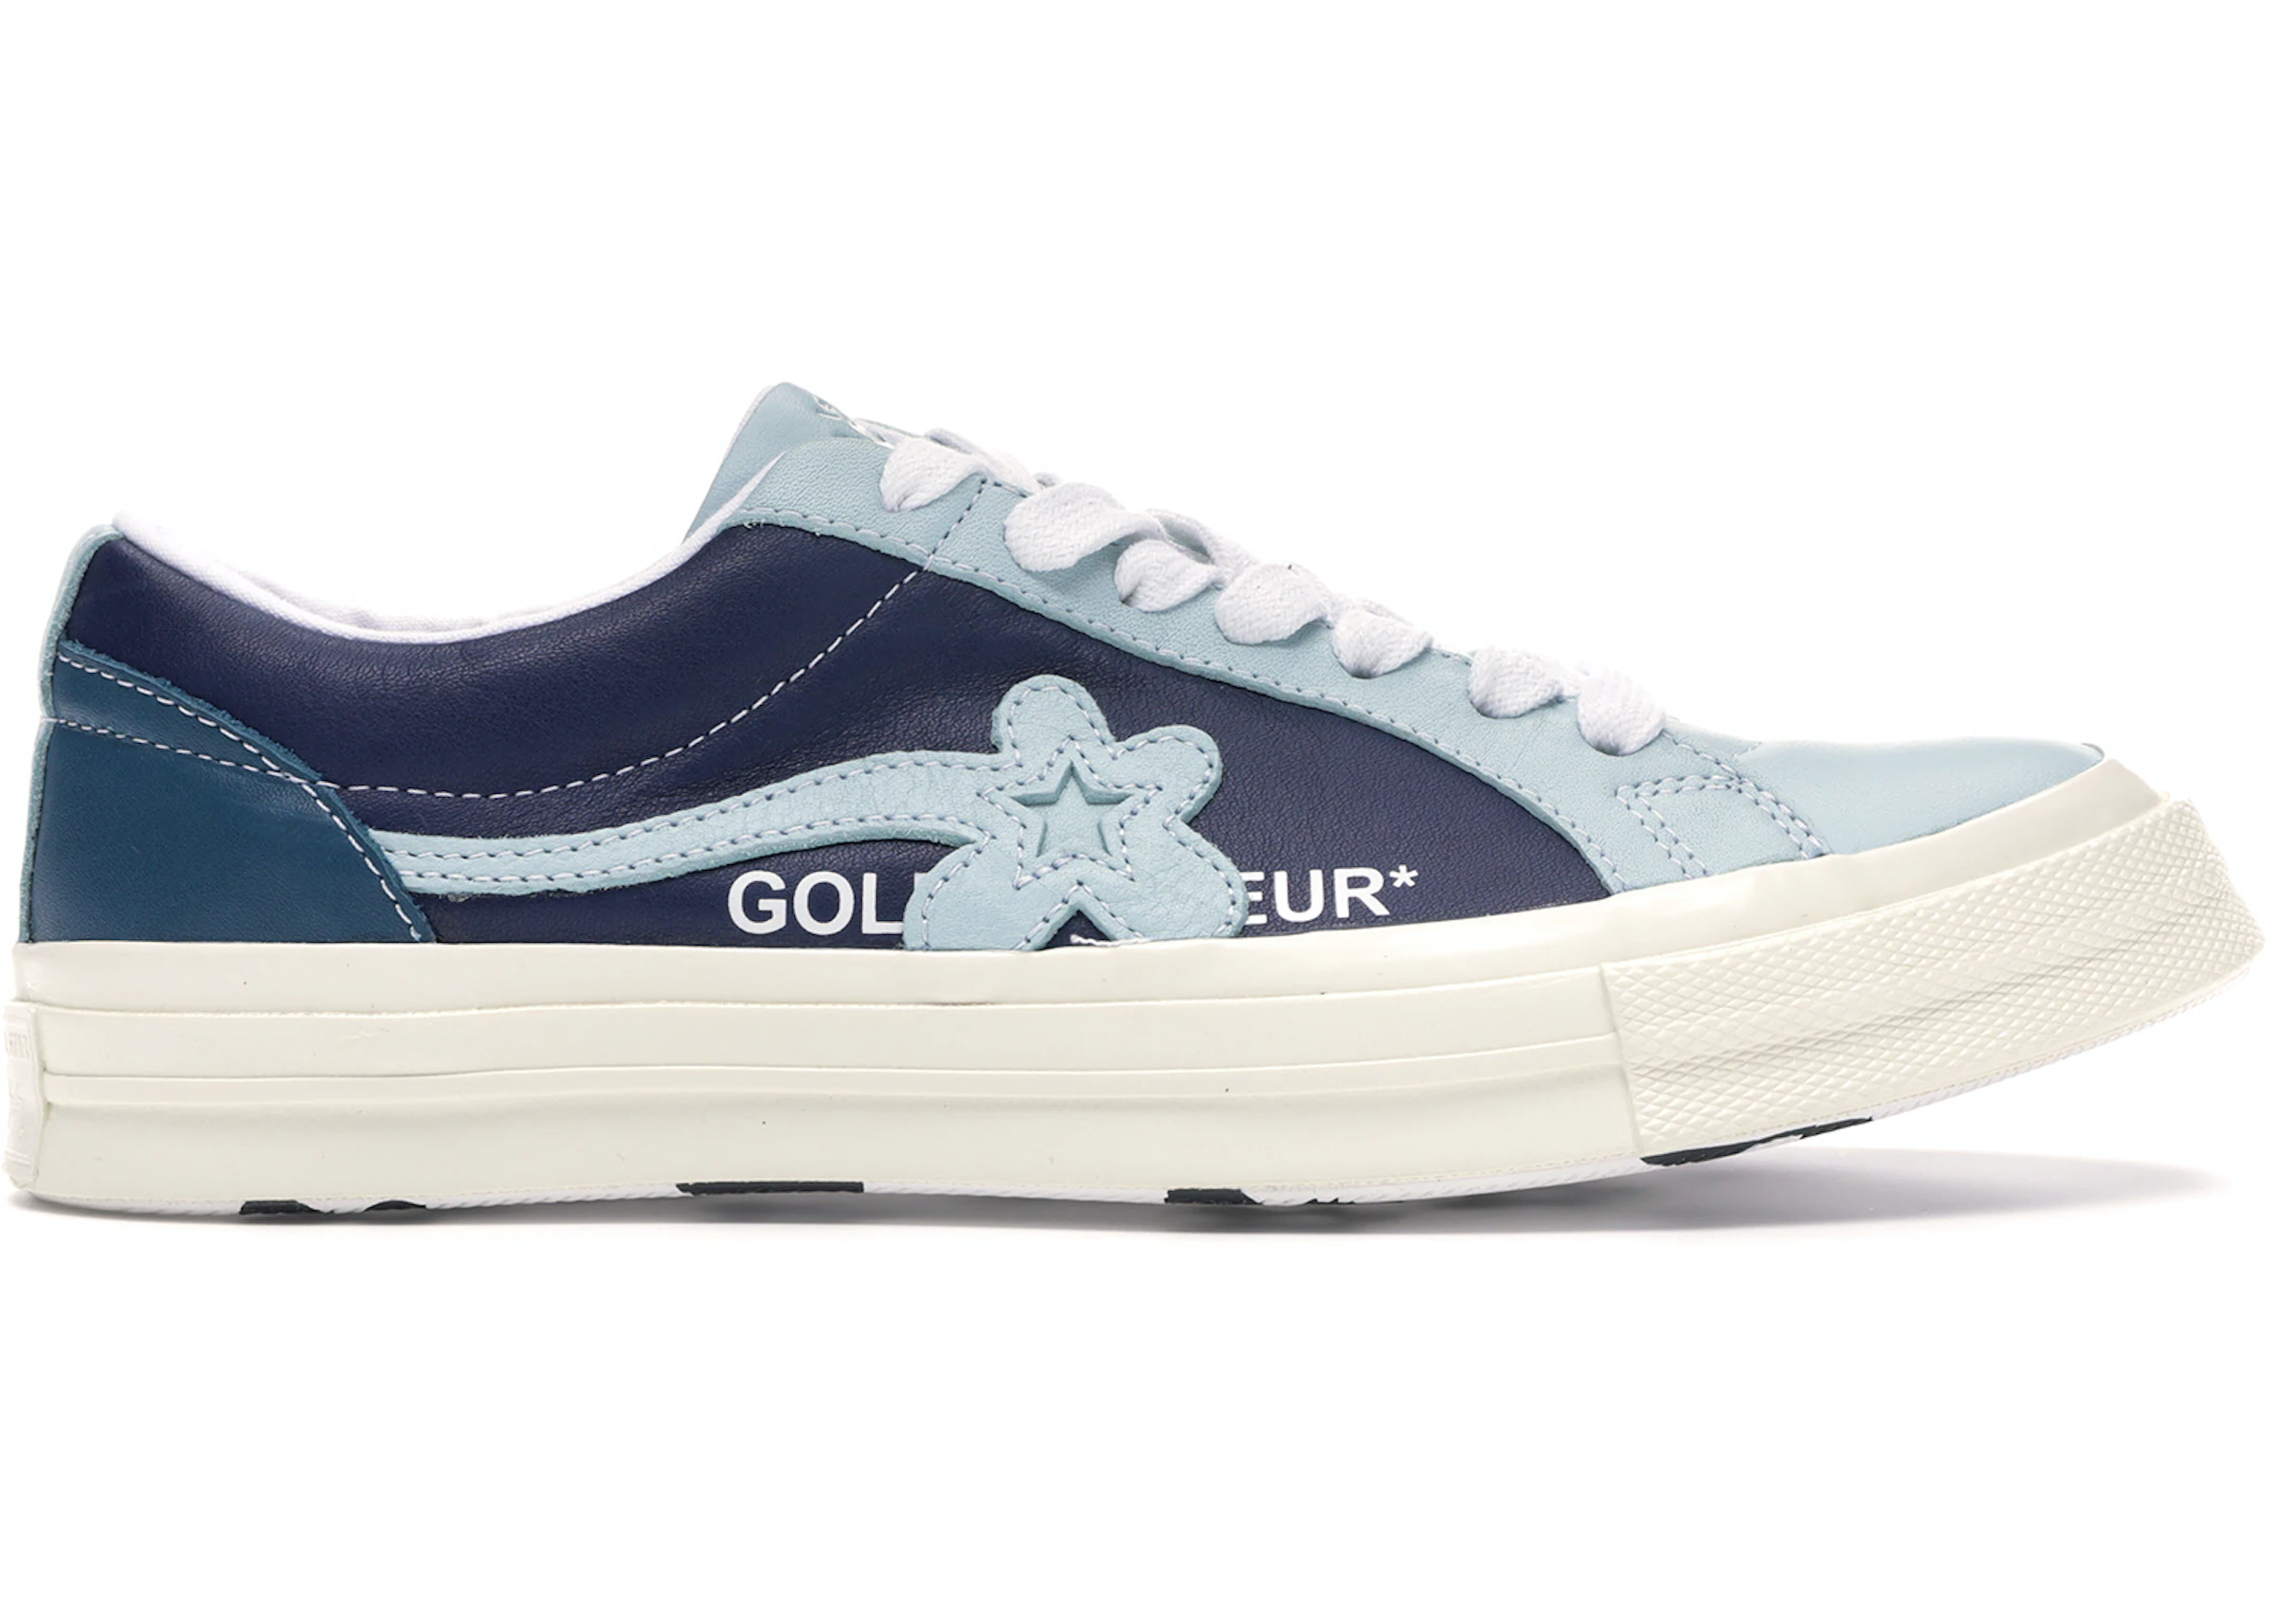 Converse One Star Ox Le Fleur Pack Barely Blue 164024C -